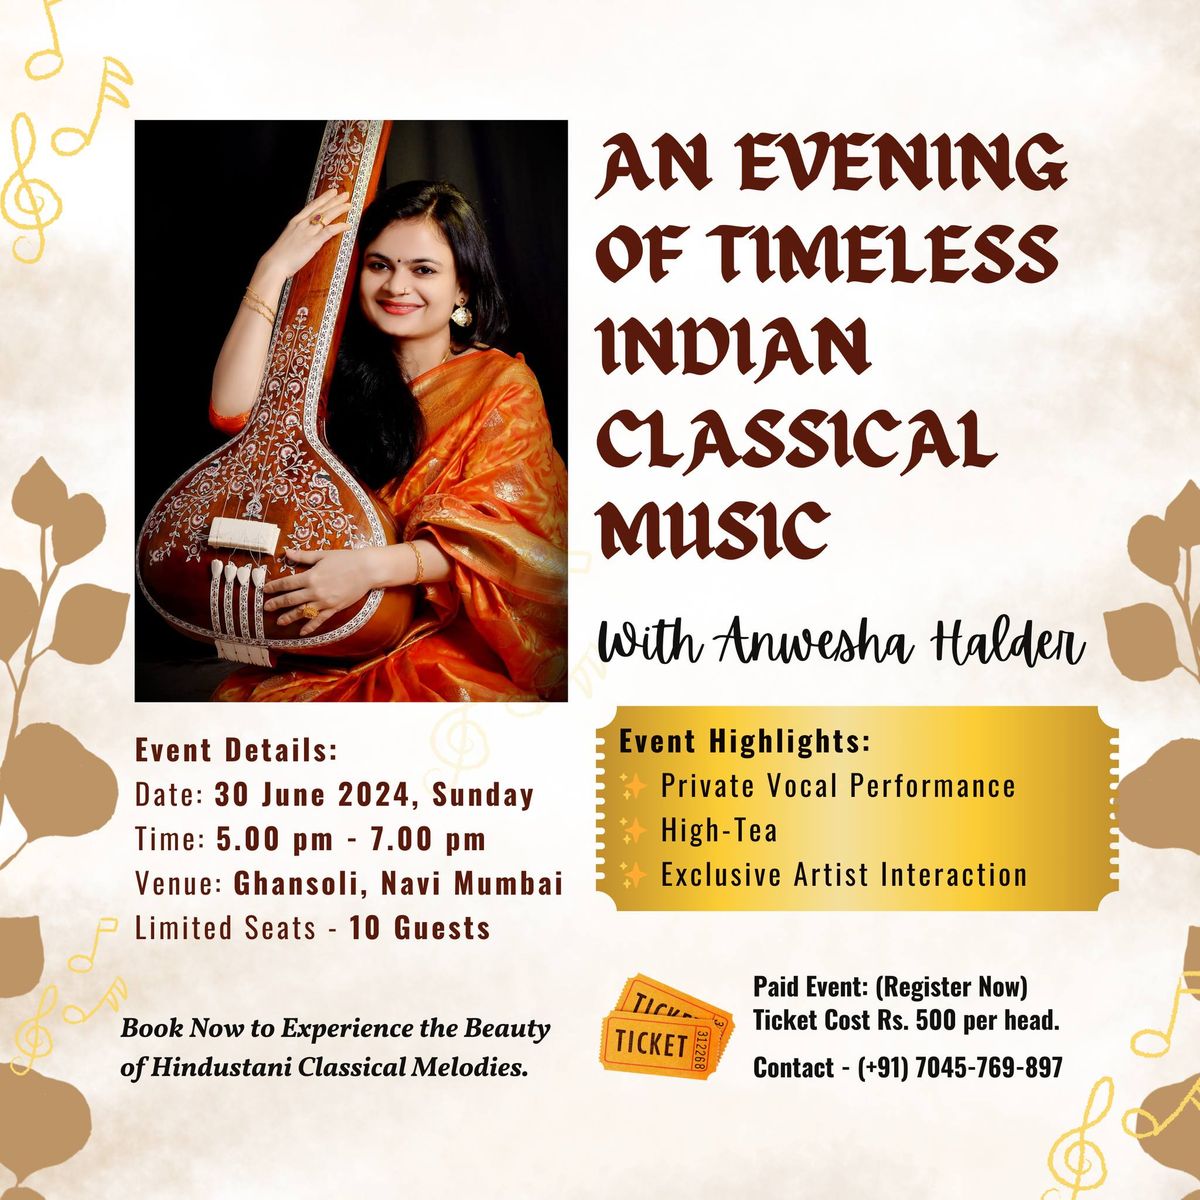 An Evening of Timeless Indian Classical Music with Anwesha Halder